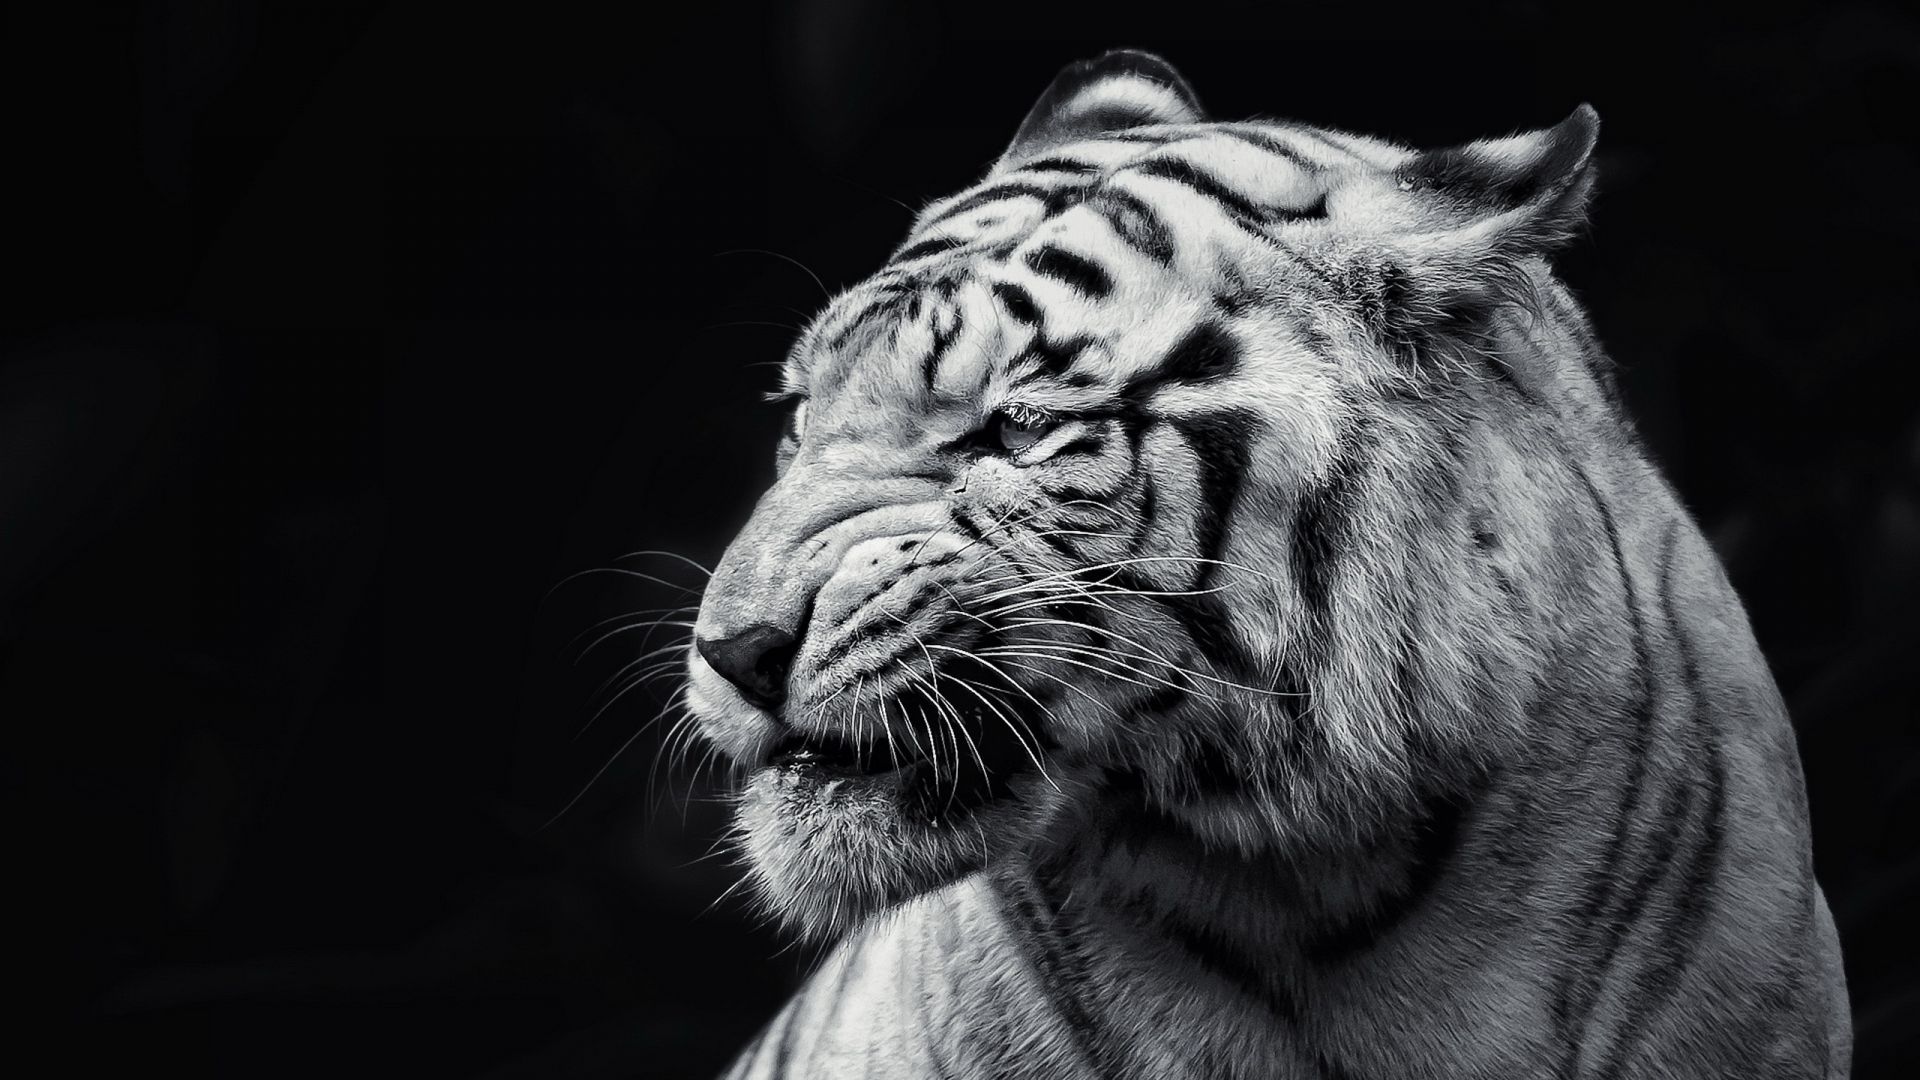 Wallpaper Tiger face eyes black and white